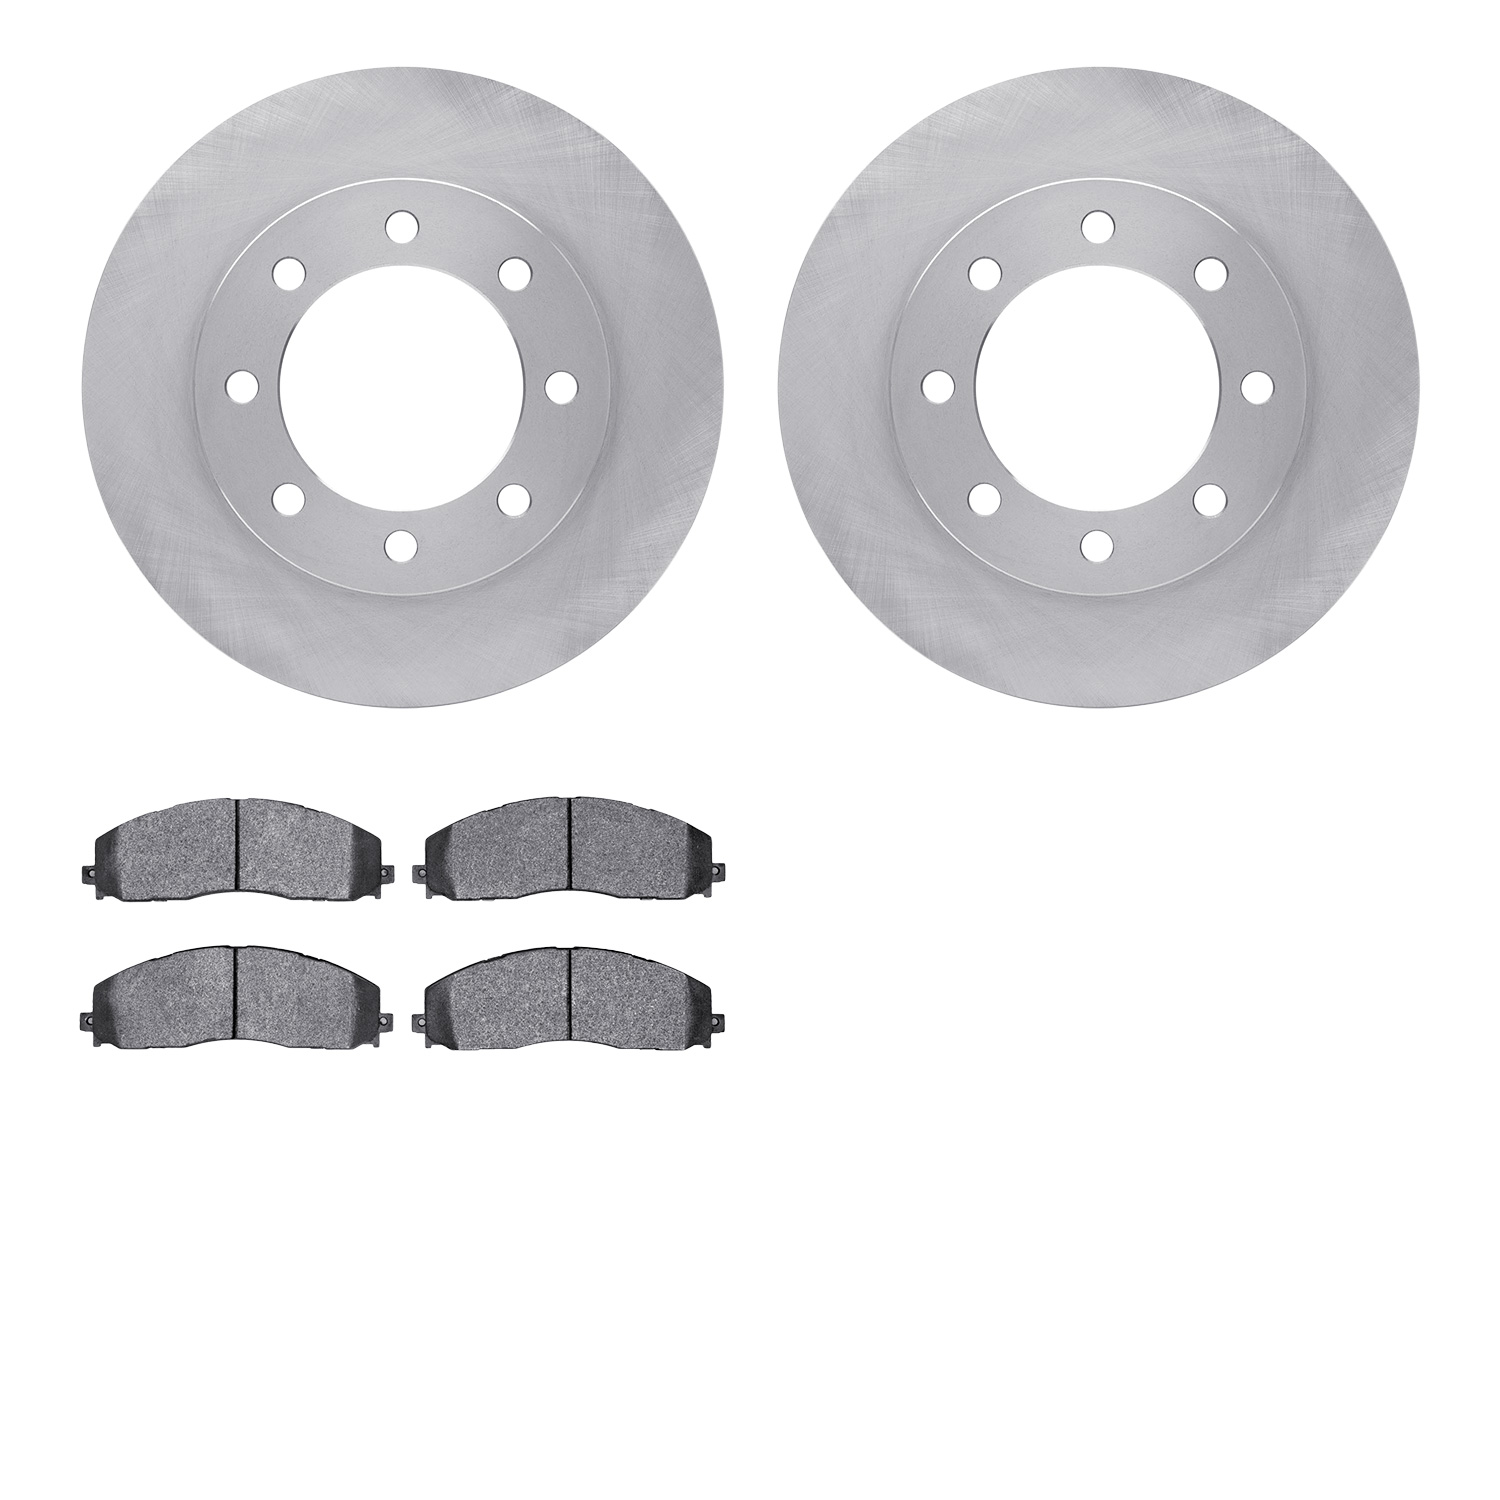 6402-54287 Brake Rotors with Ultimate-Duty Brake Pads, Fits Select Ford/Lincoln/Mercury/Mazda, Position: Front